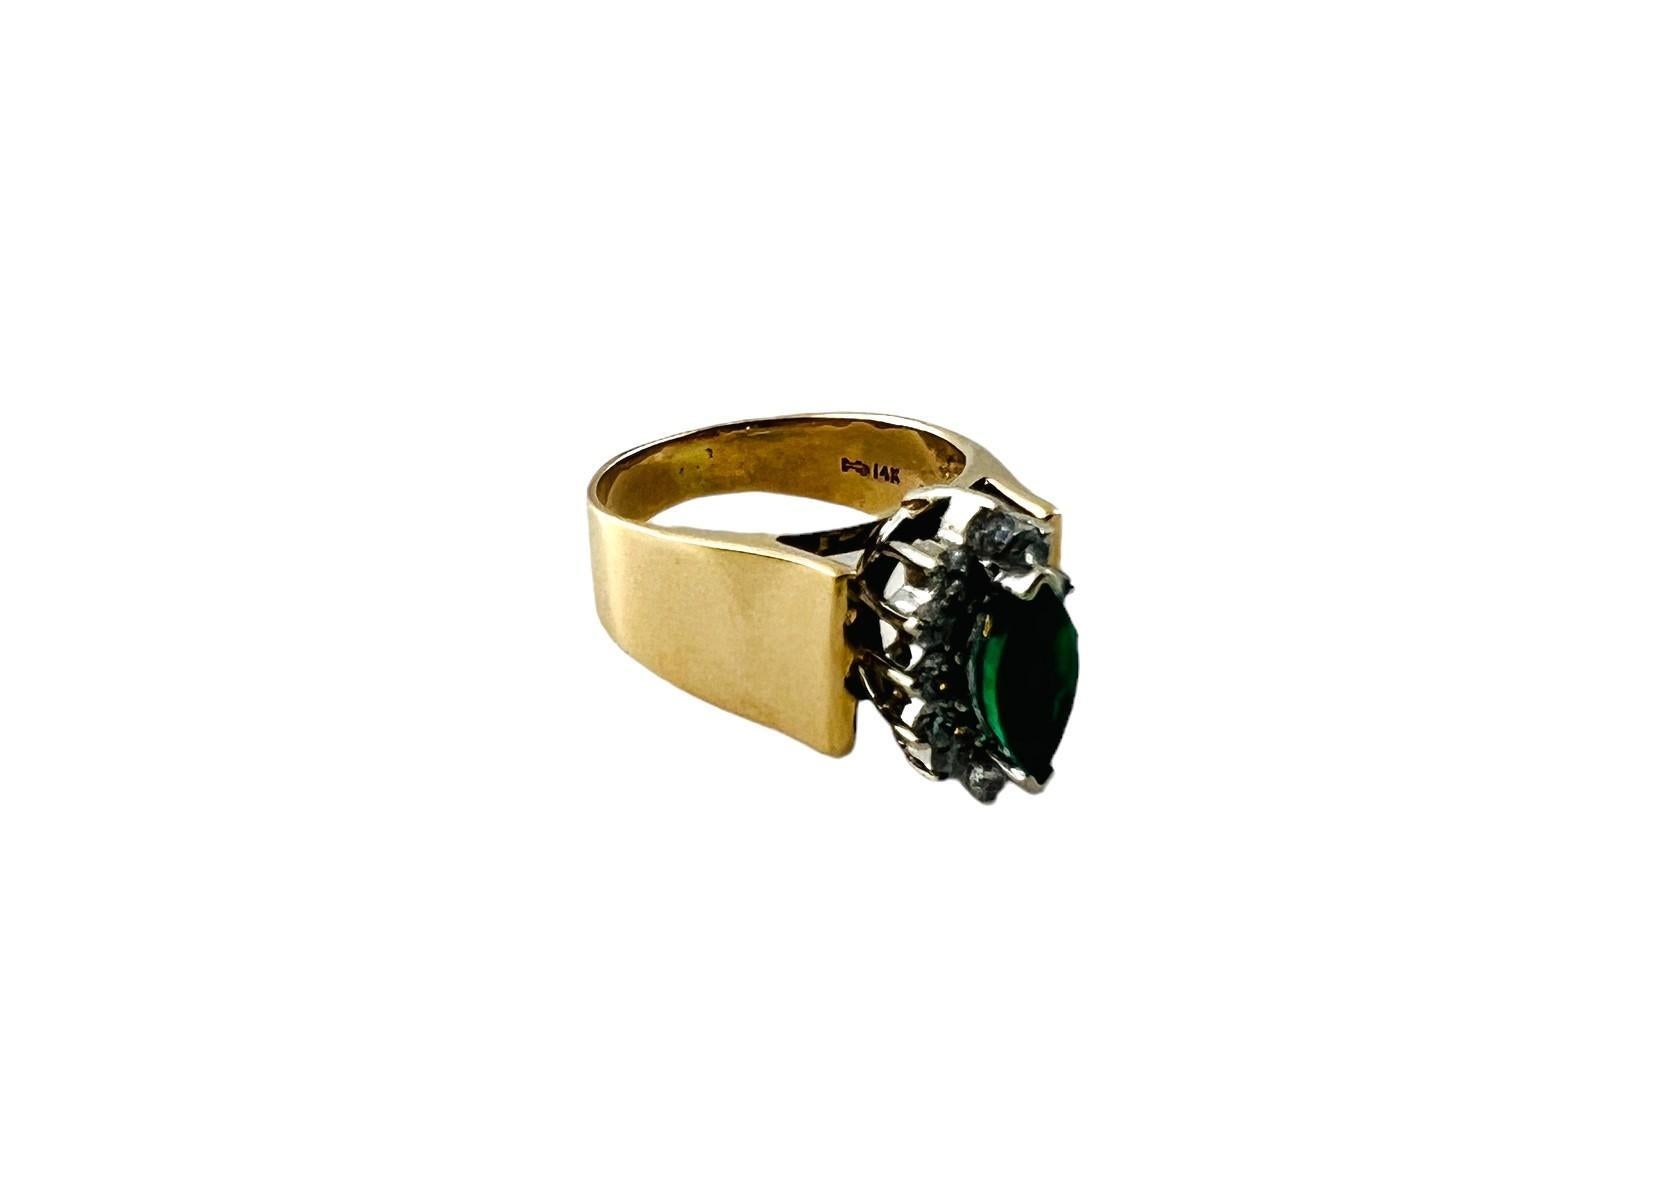 Vintage 14K Yellow Gold Natural Emerald and Diamond Ring Size 5.5

This gorgeous, large band 14K gold ring has a beautiful design featuring 12 round brilliant cut diamonds surrounding a sparkling, natural green emerald in center

Approximate total